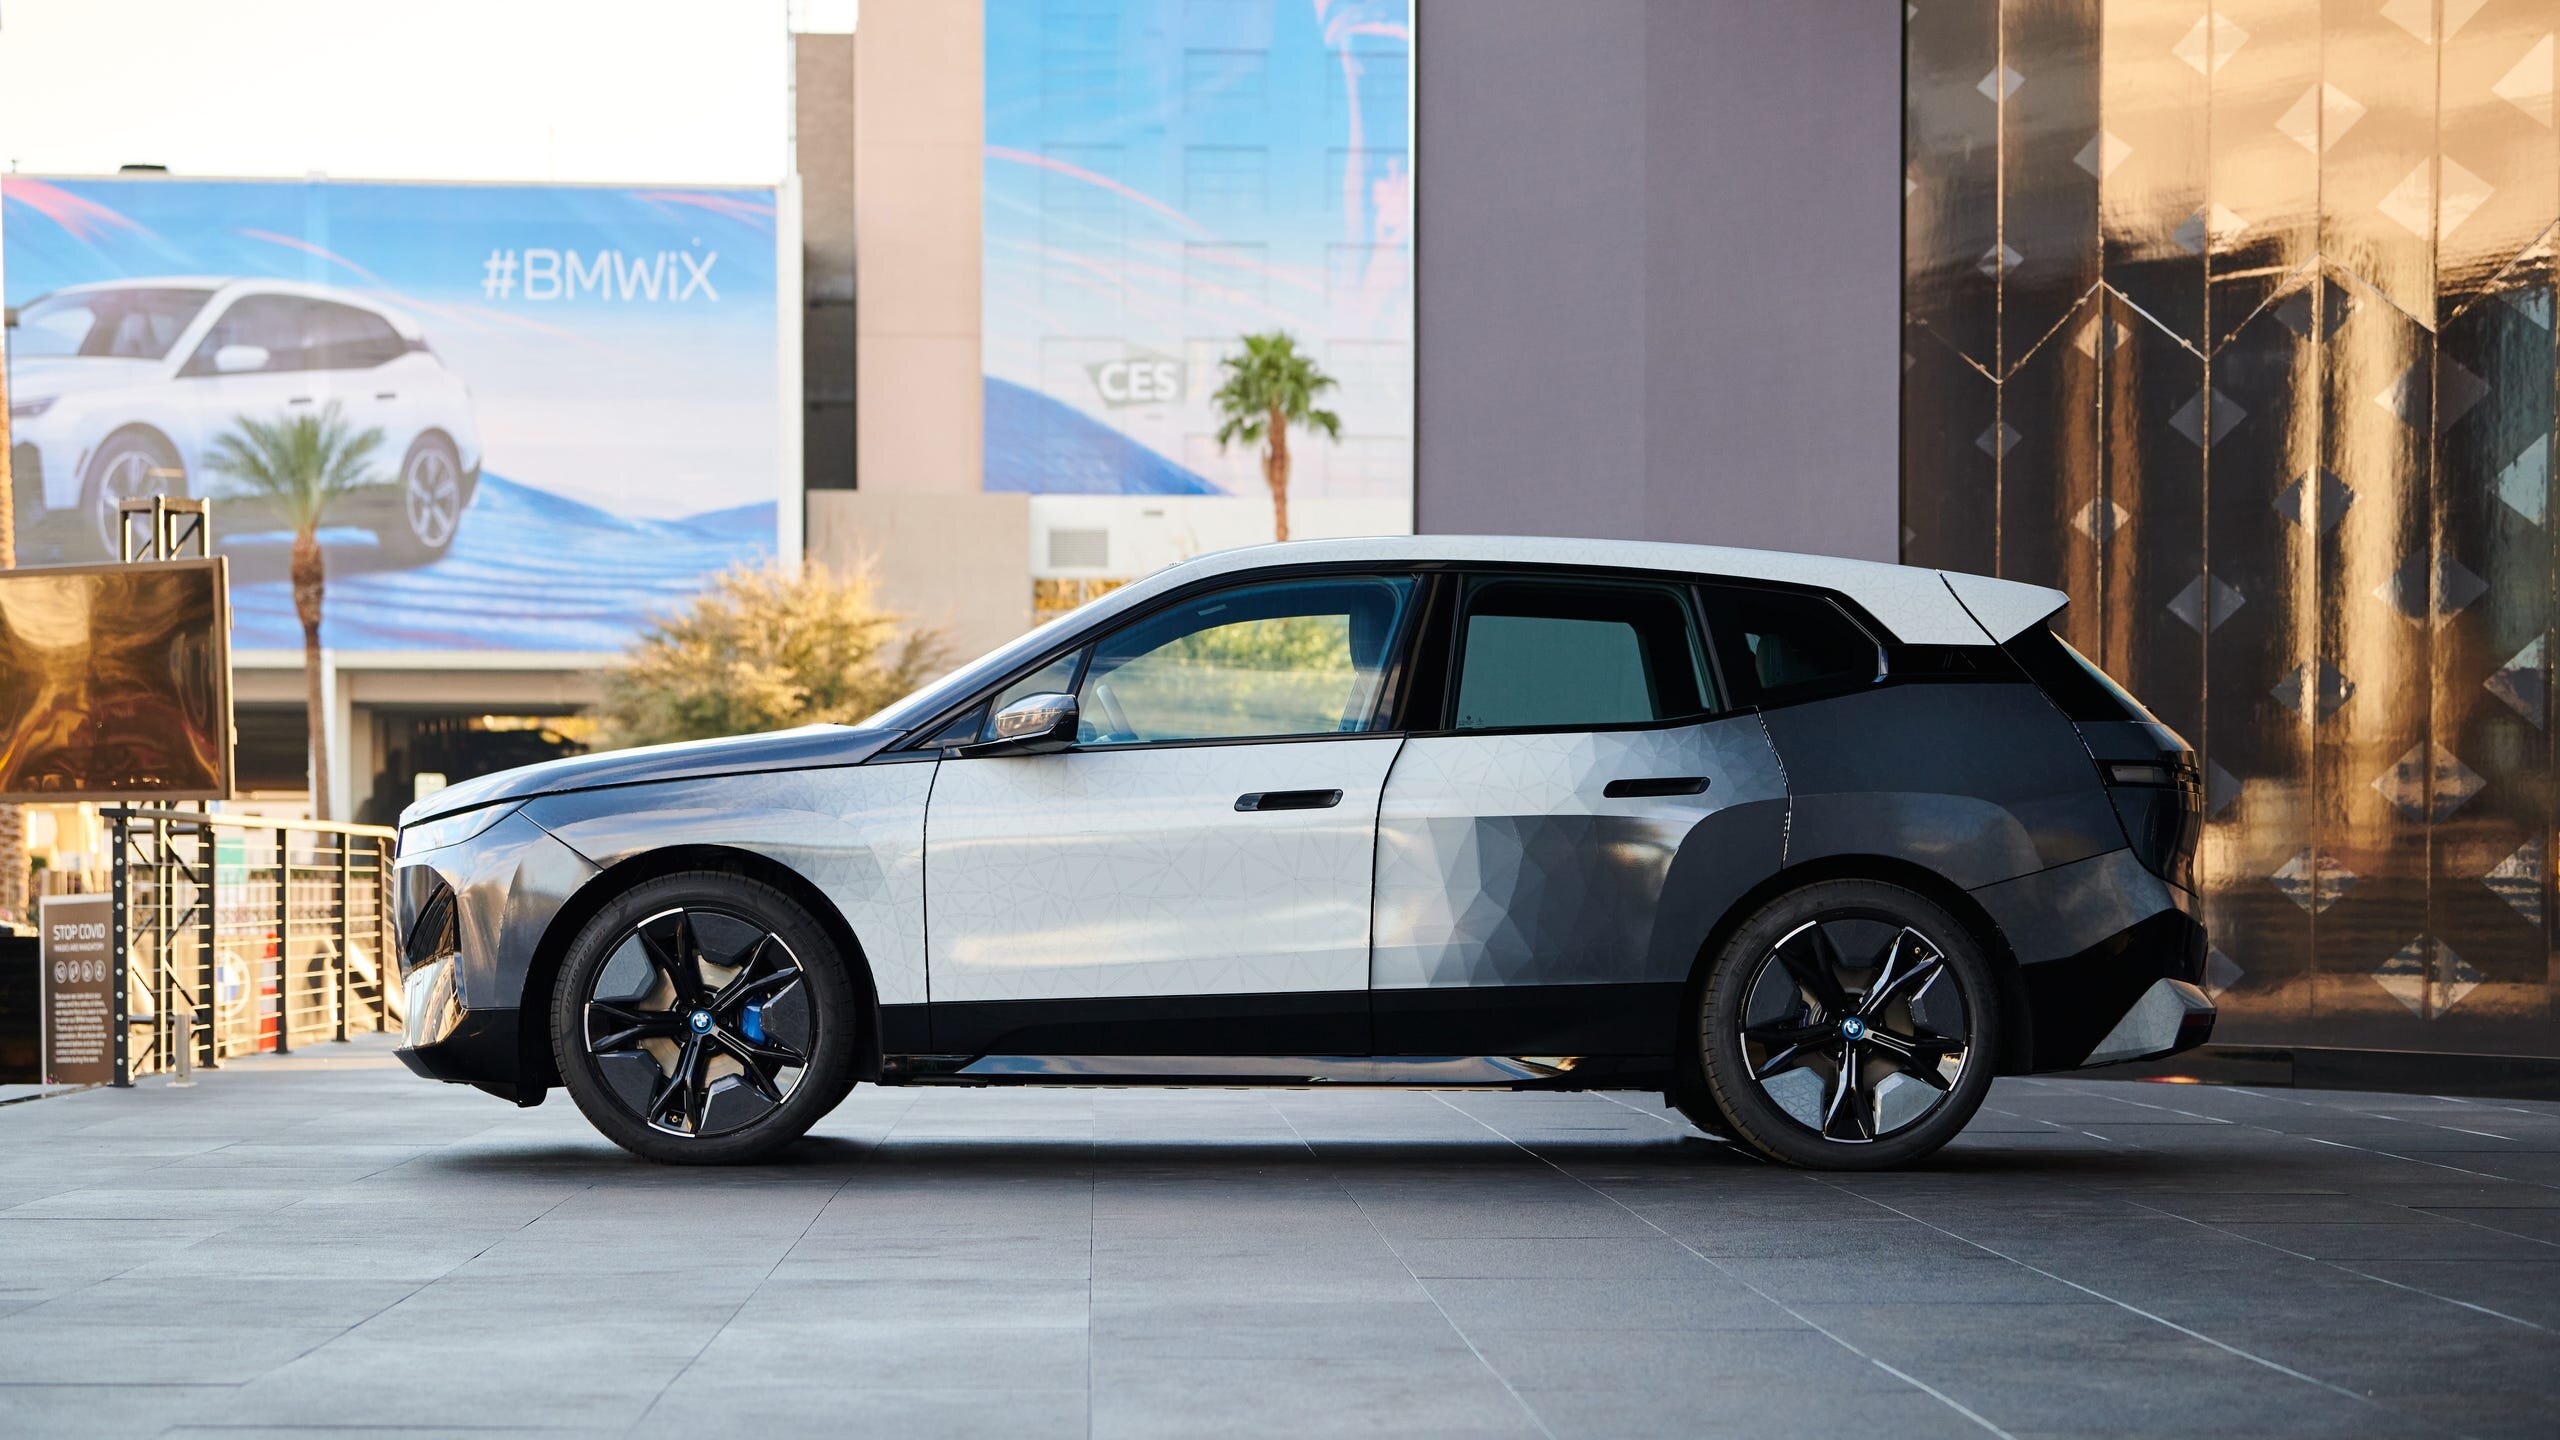 BMW Unveils Color Changing IX Flow SUV At CES With E Ink Technology